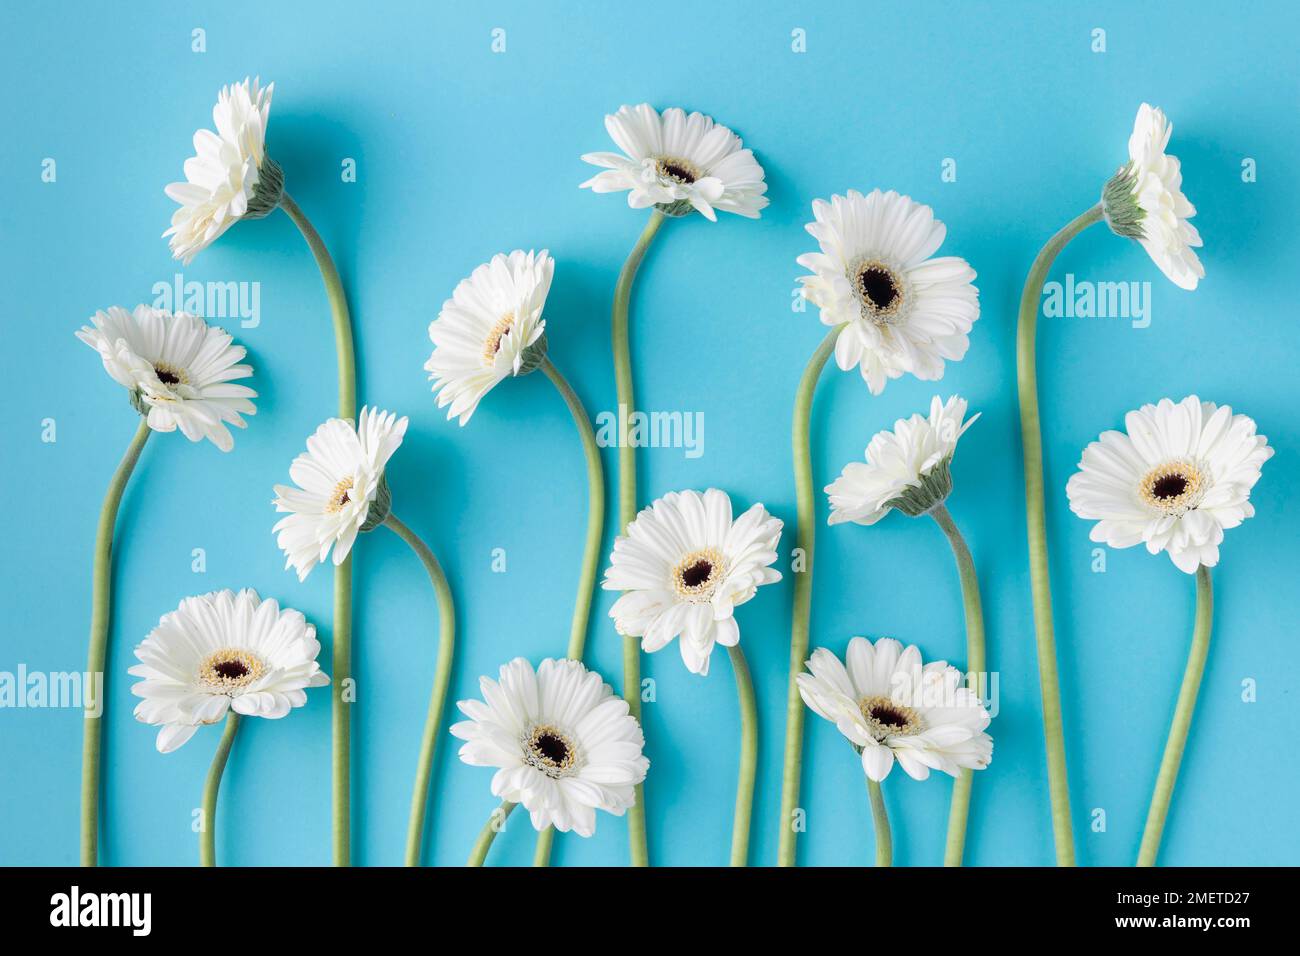 Top view blooming flowers Stock Photo